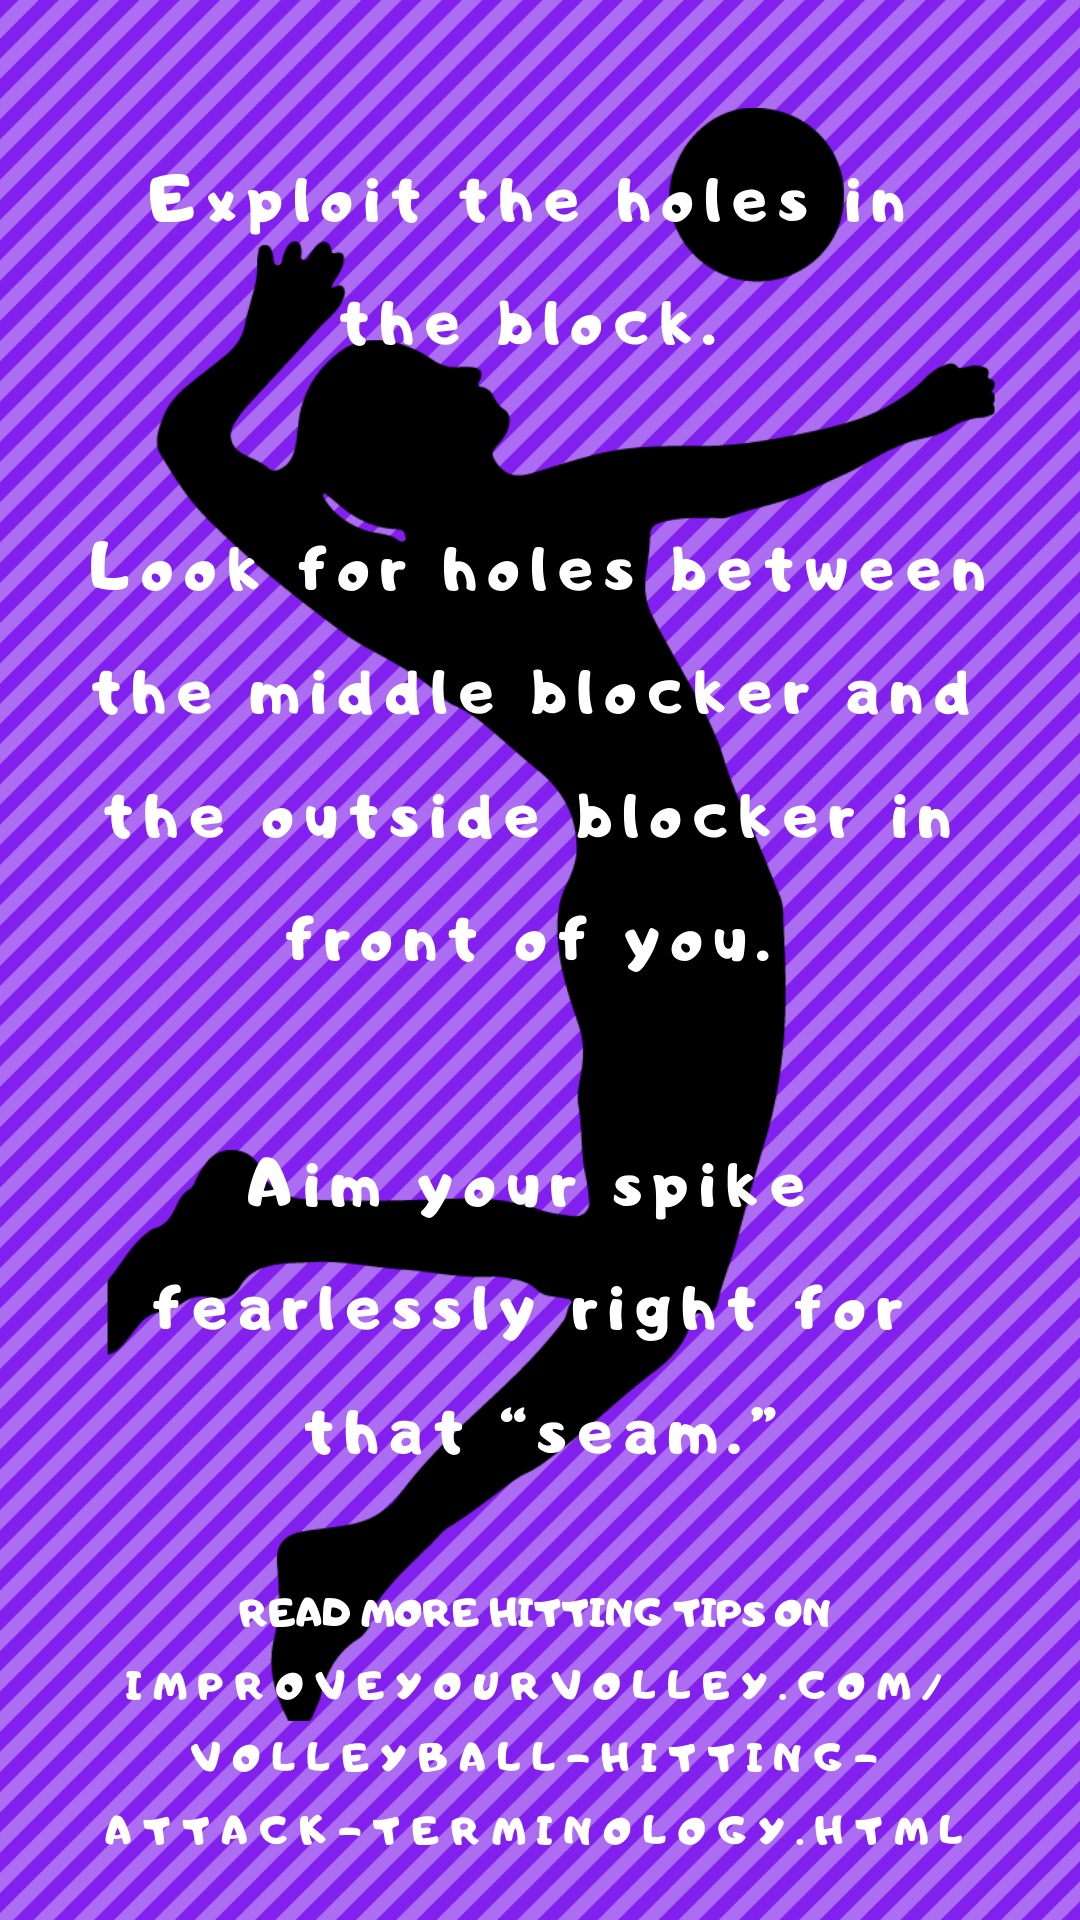 Exploit the holes in the block. Look for holes between the middle blocker and the outside blocker in front of you. Aim your spike fearlessly right for that “seam.”